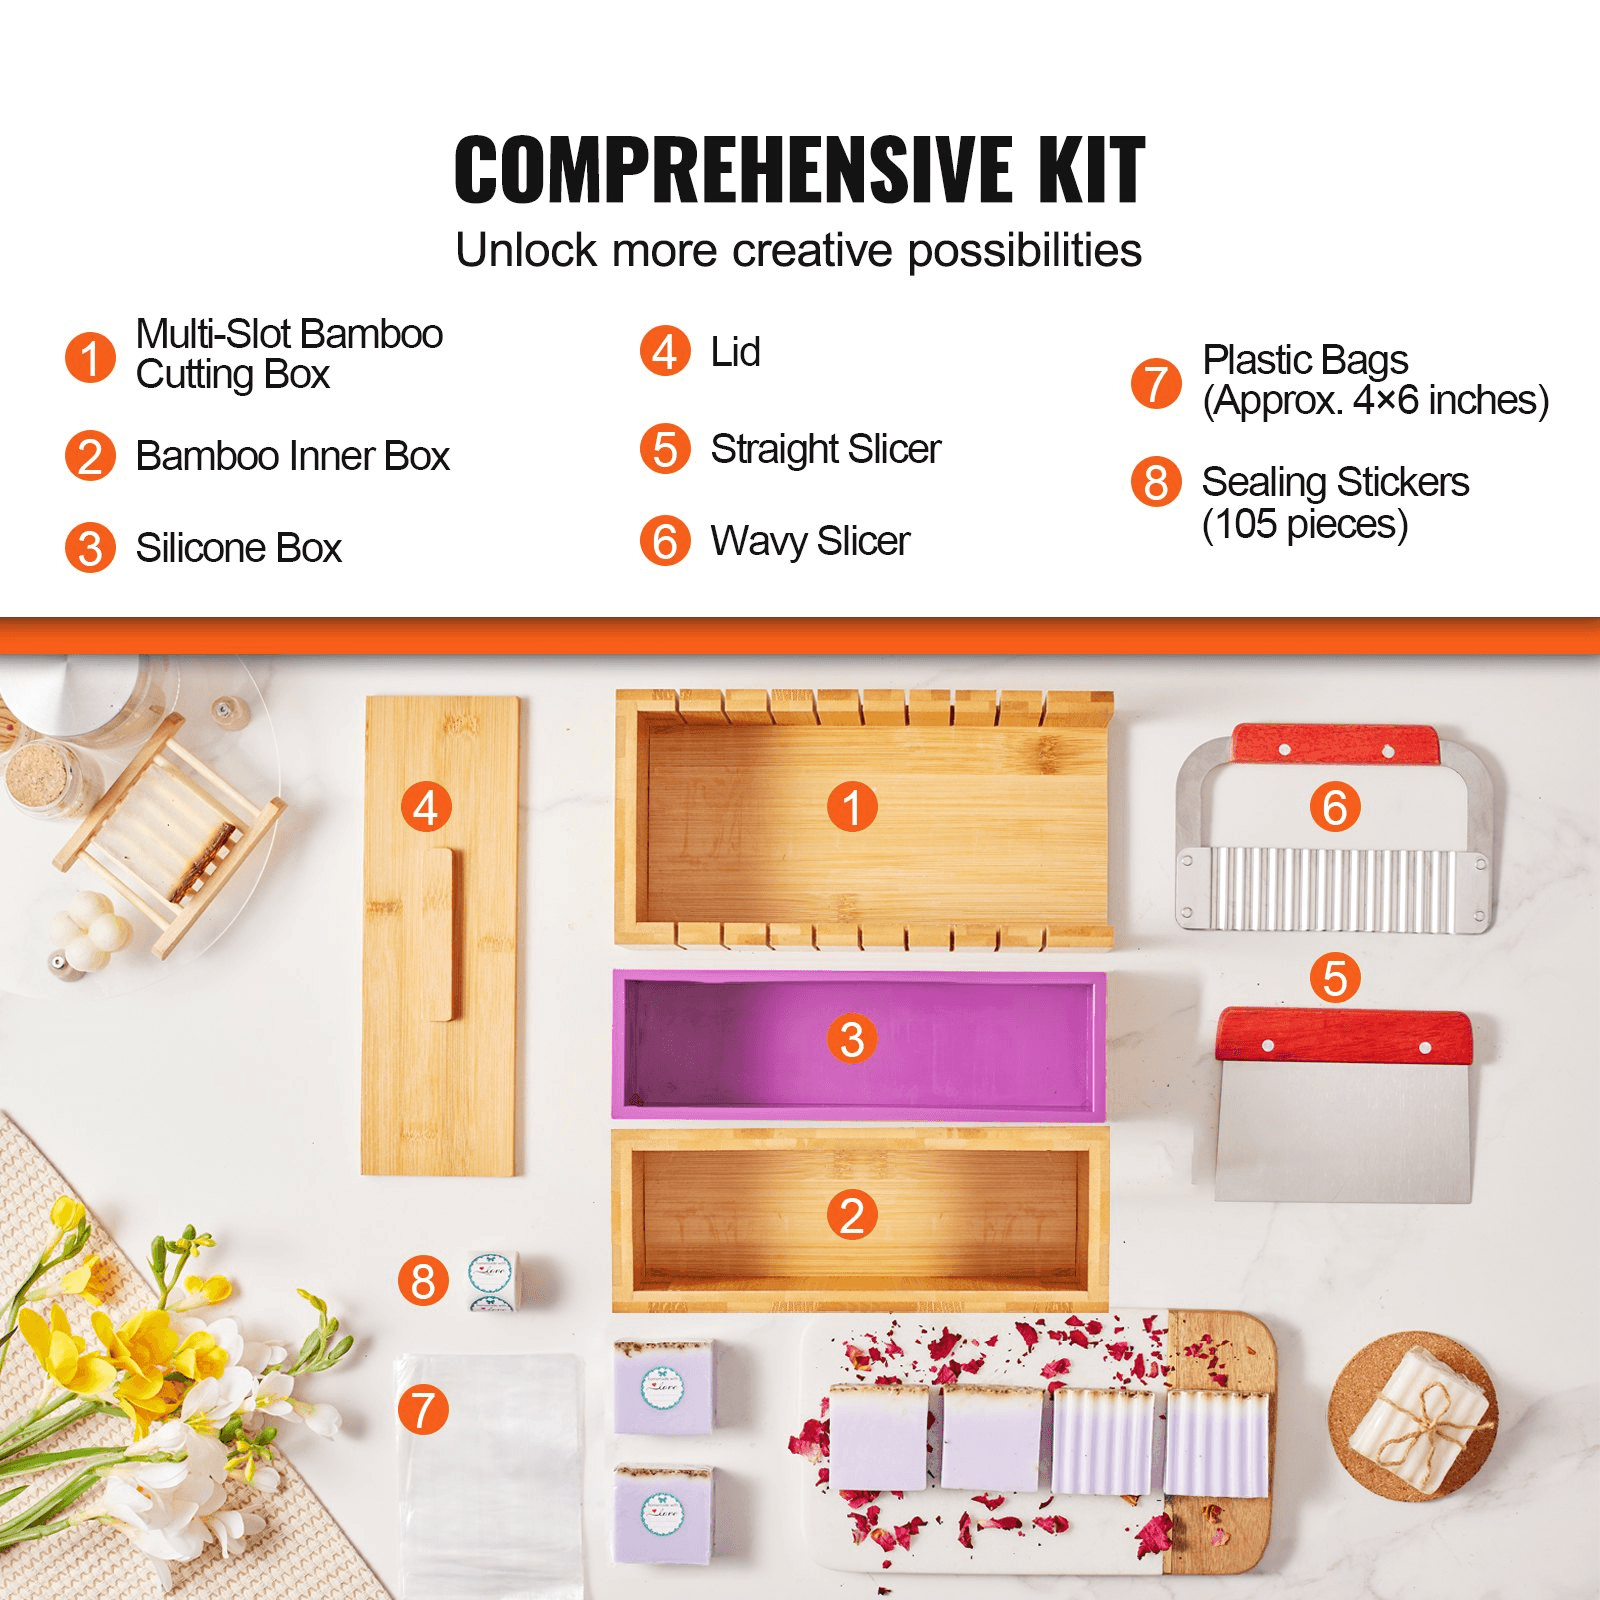 VEVOR Soap Making Kit, Bamboo Cutting Box and Inner Box with Silicone Mold, Stainless Steel Straight Cutter and Wavy Cutter, 100 Bags and 105 Stickers, Soap Making Supplies DIY Kits for Adults - Loomini